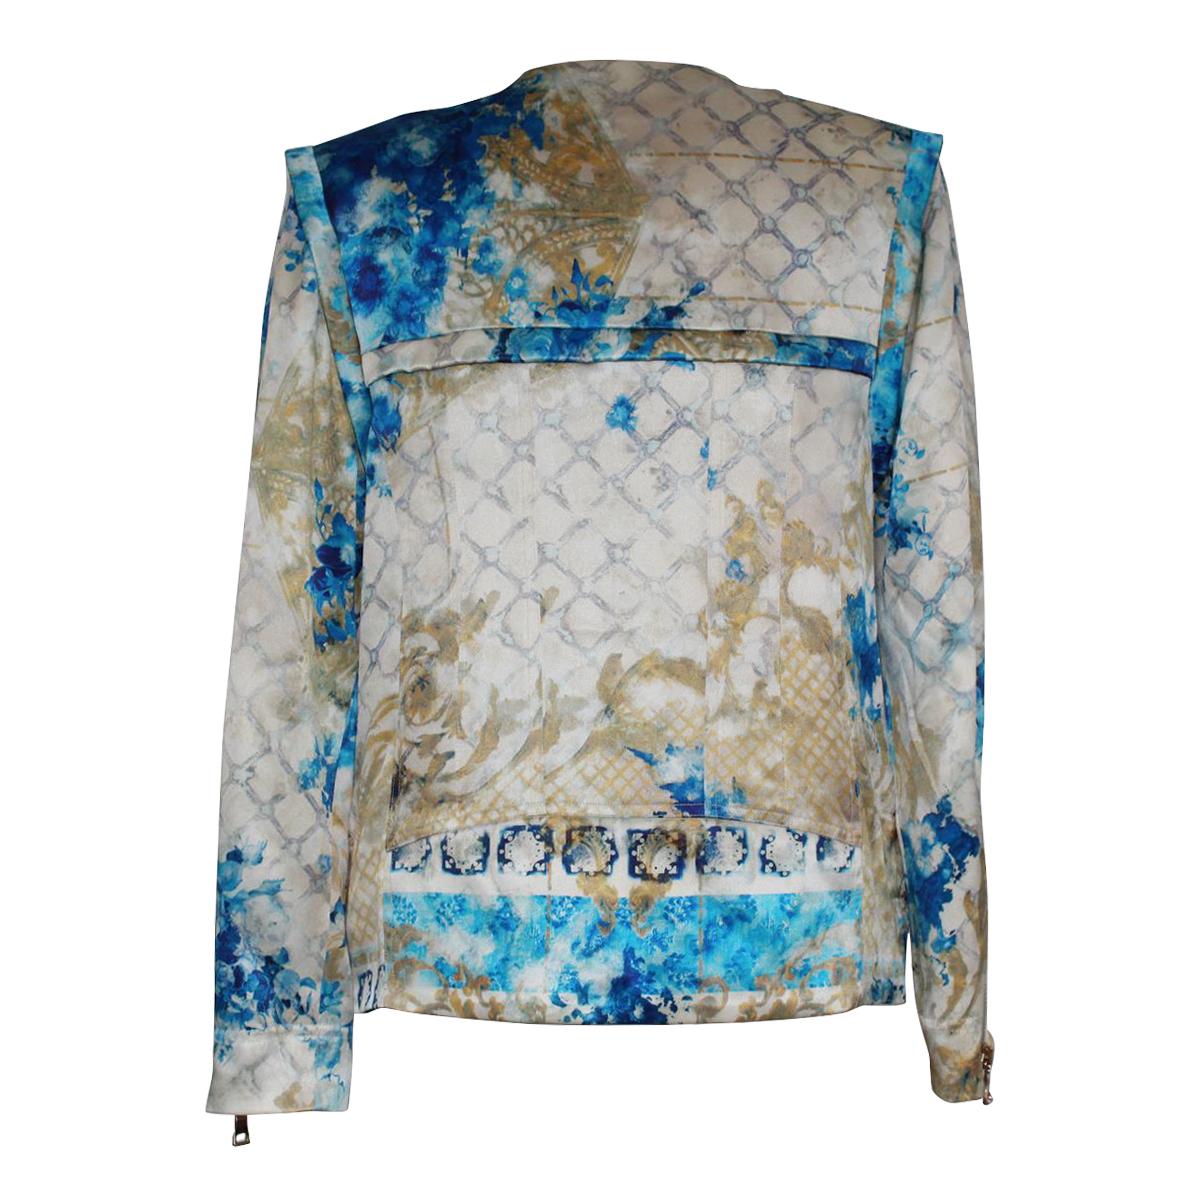 Amazing Balmain jacket
Silk
Gold, ivry and blue color
Fancy fabric
Side zip
Four pockets 
Lengt shoulder / hem cm 60 (23.6 inches)
Shoulder cm 40 (15.7 inches)
WORLDWIDE EXPRESS SHIPPING INCLUDED IN THE PRICE !